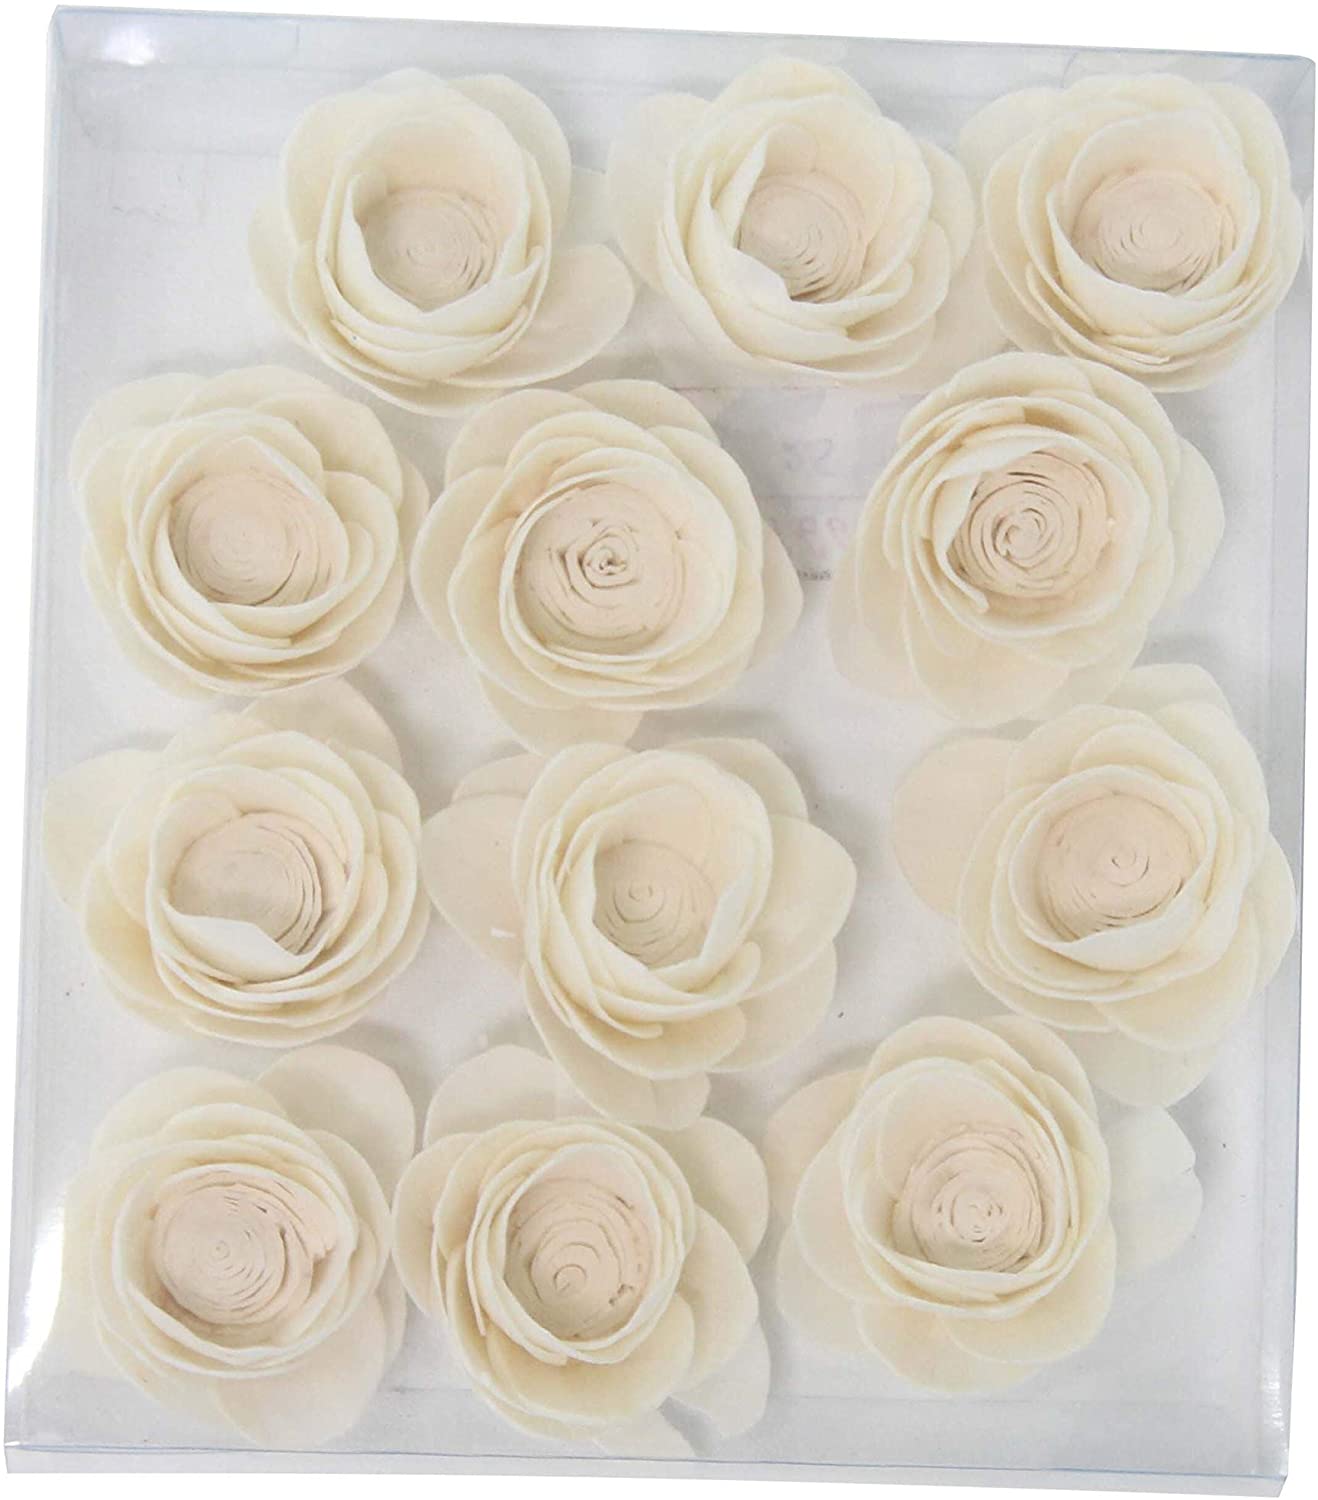 Set 2 Boxed Natural White Peony Flowers Bohemian Eclectic Fiber Finish